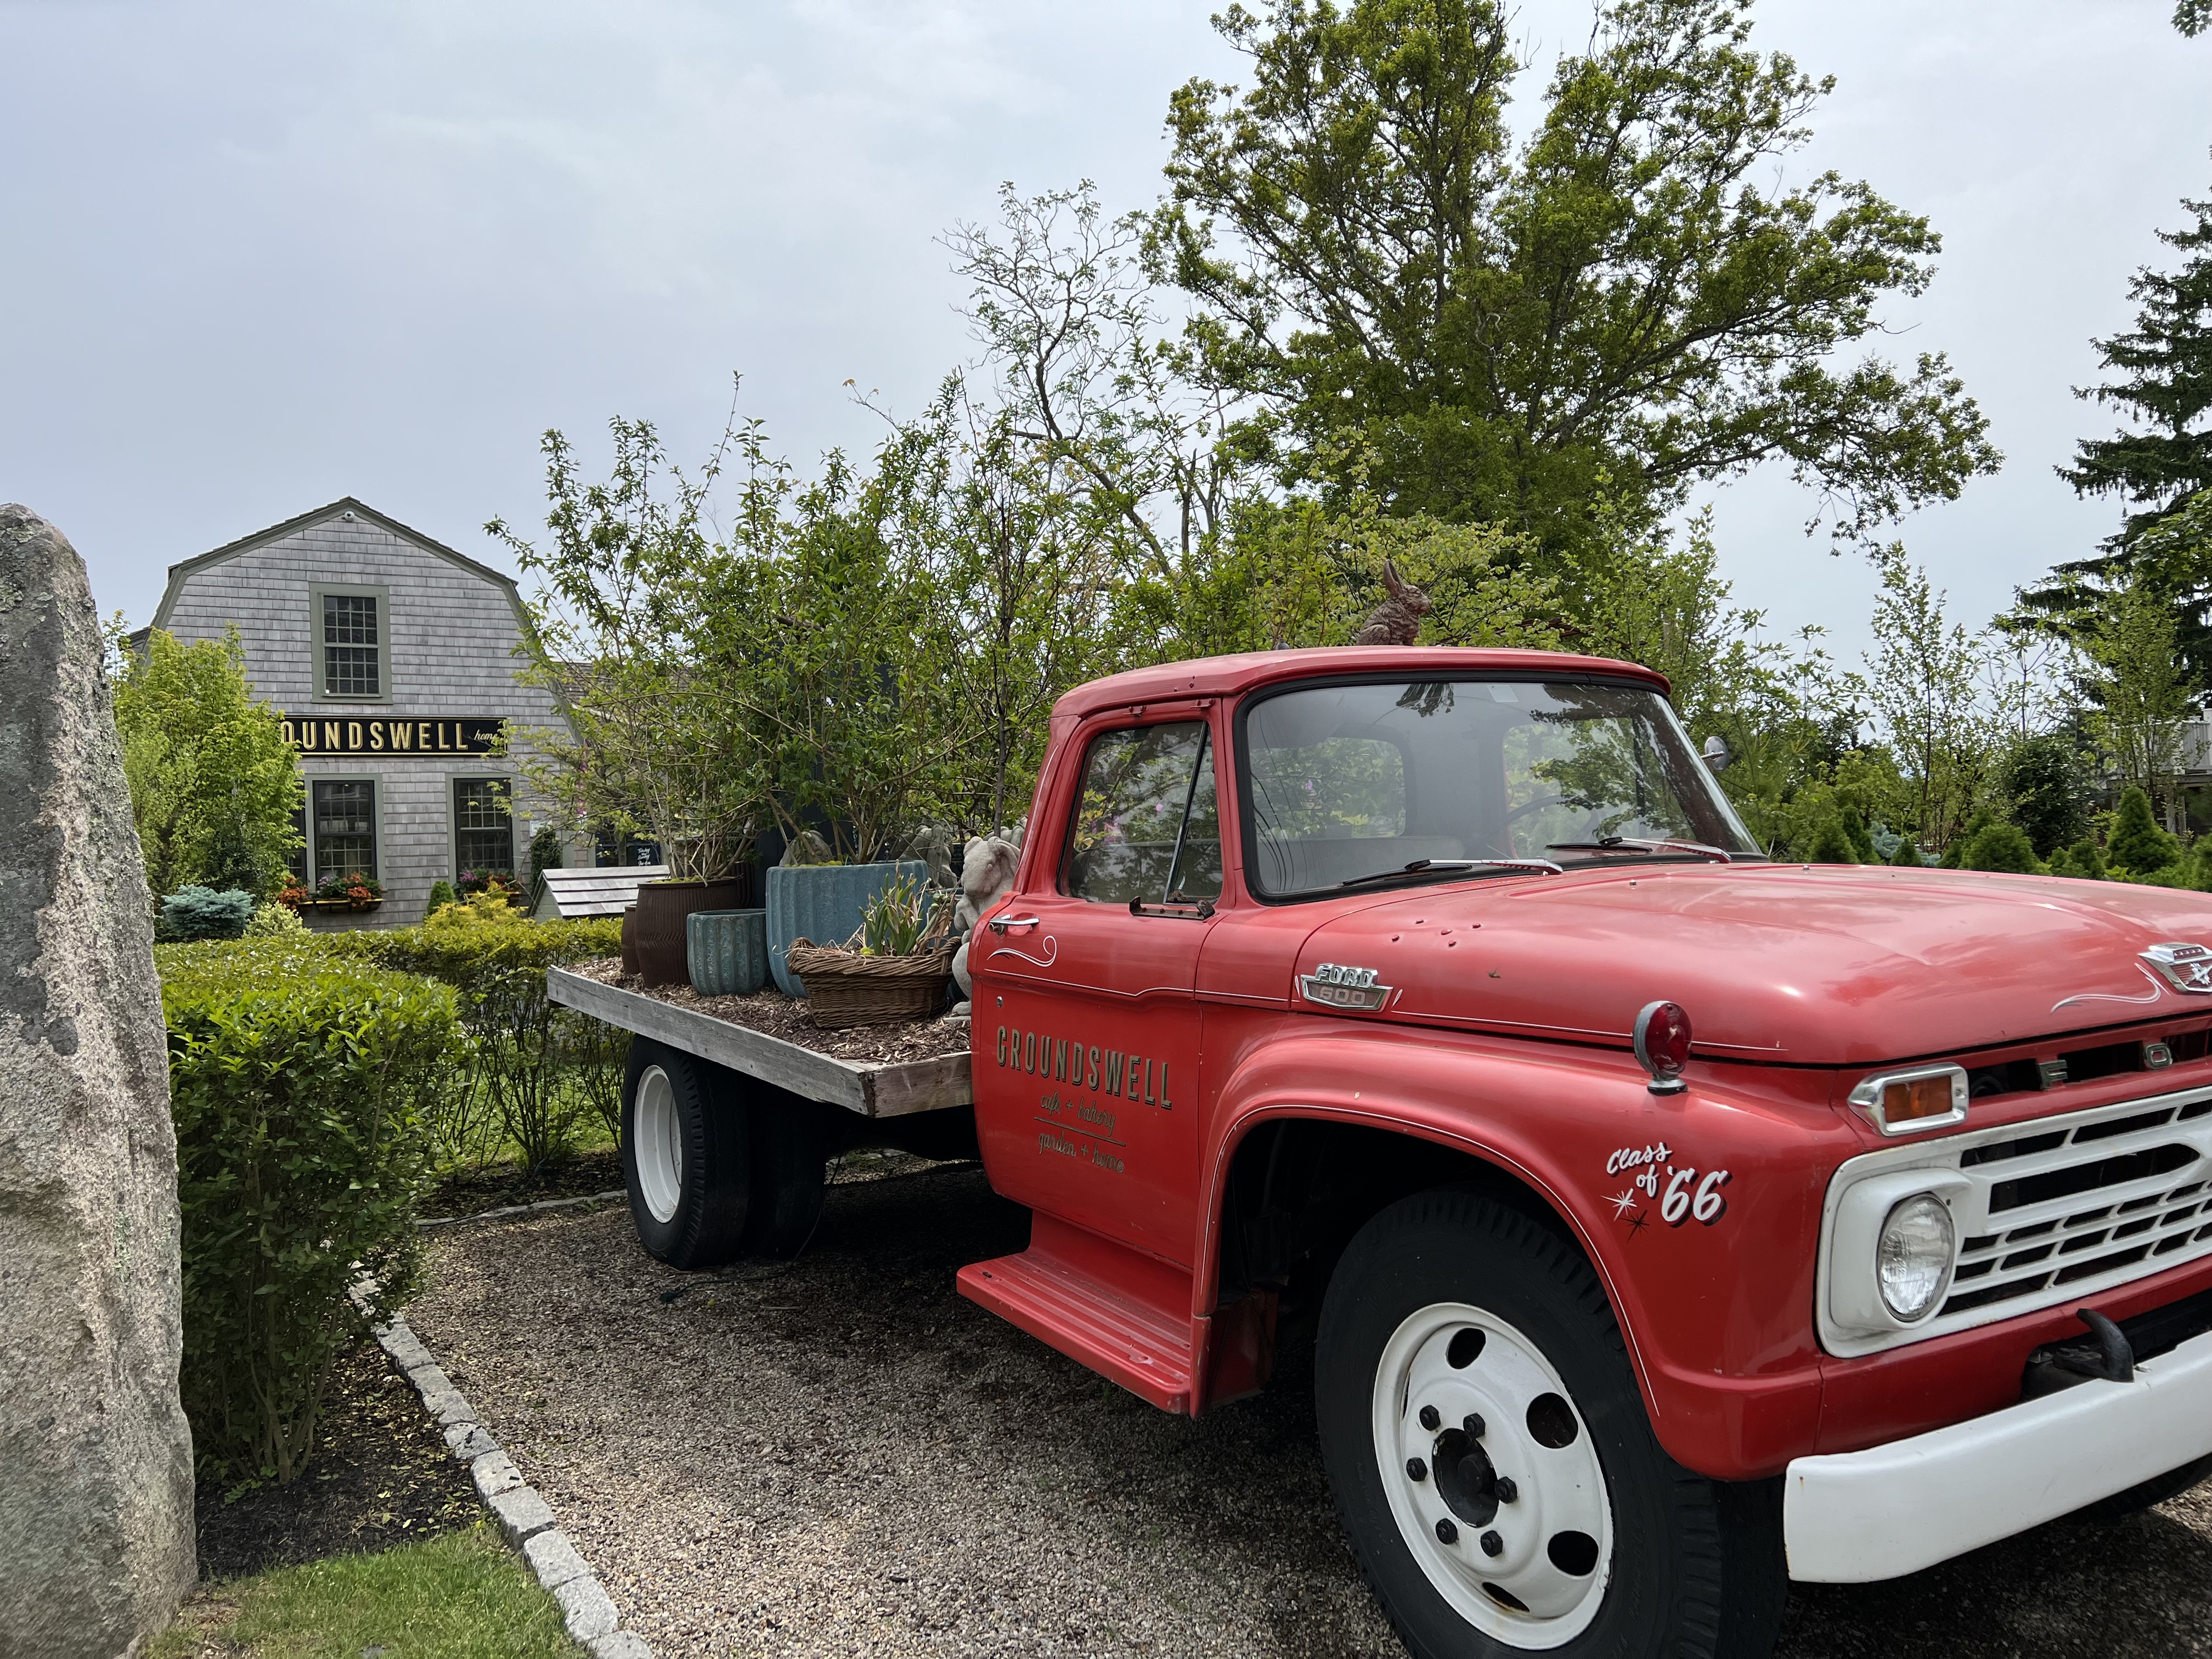 View of Vintage Ford Model F700 Truck at Groundswell - an experience included in the Come away to the Quiet Coast Tour.